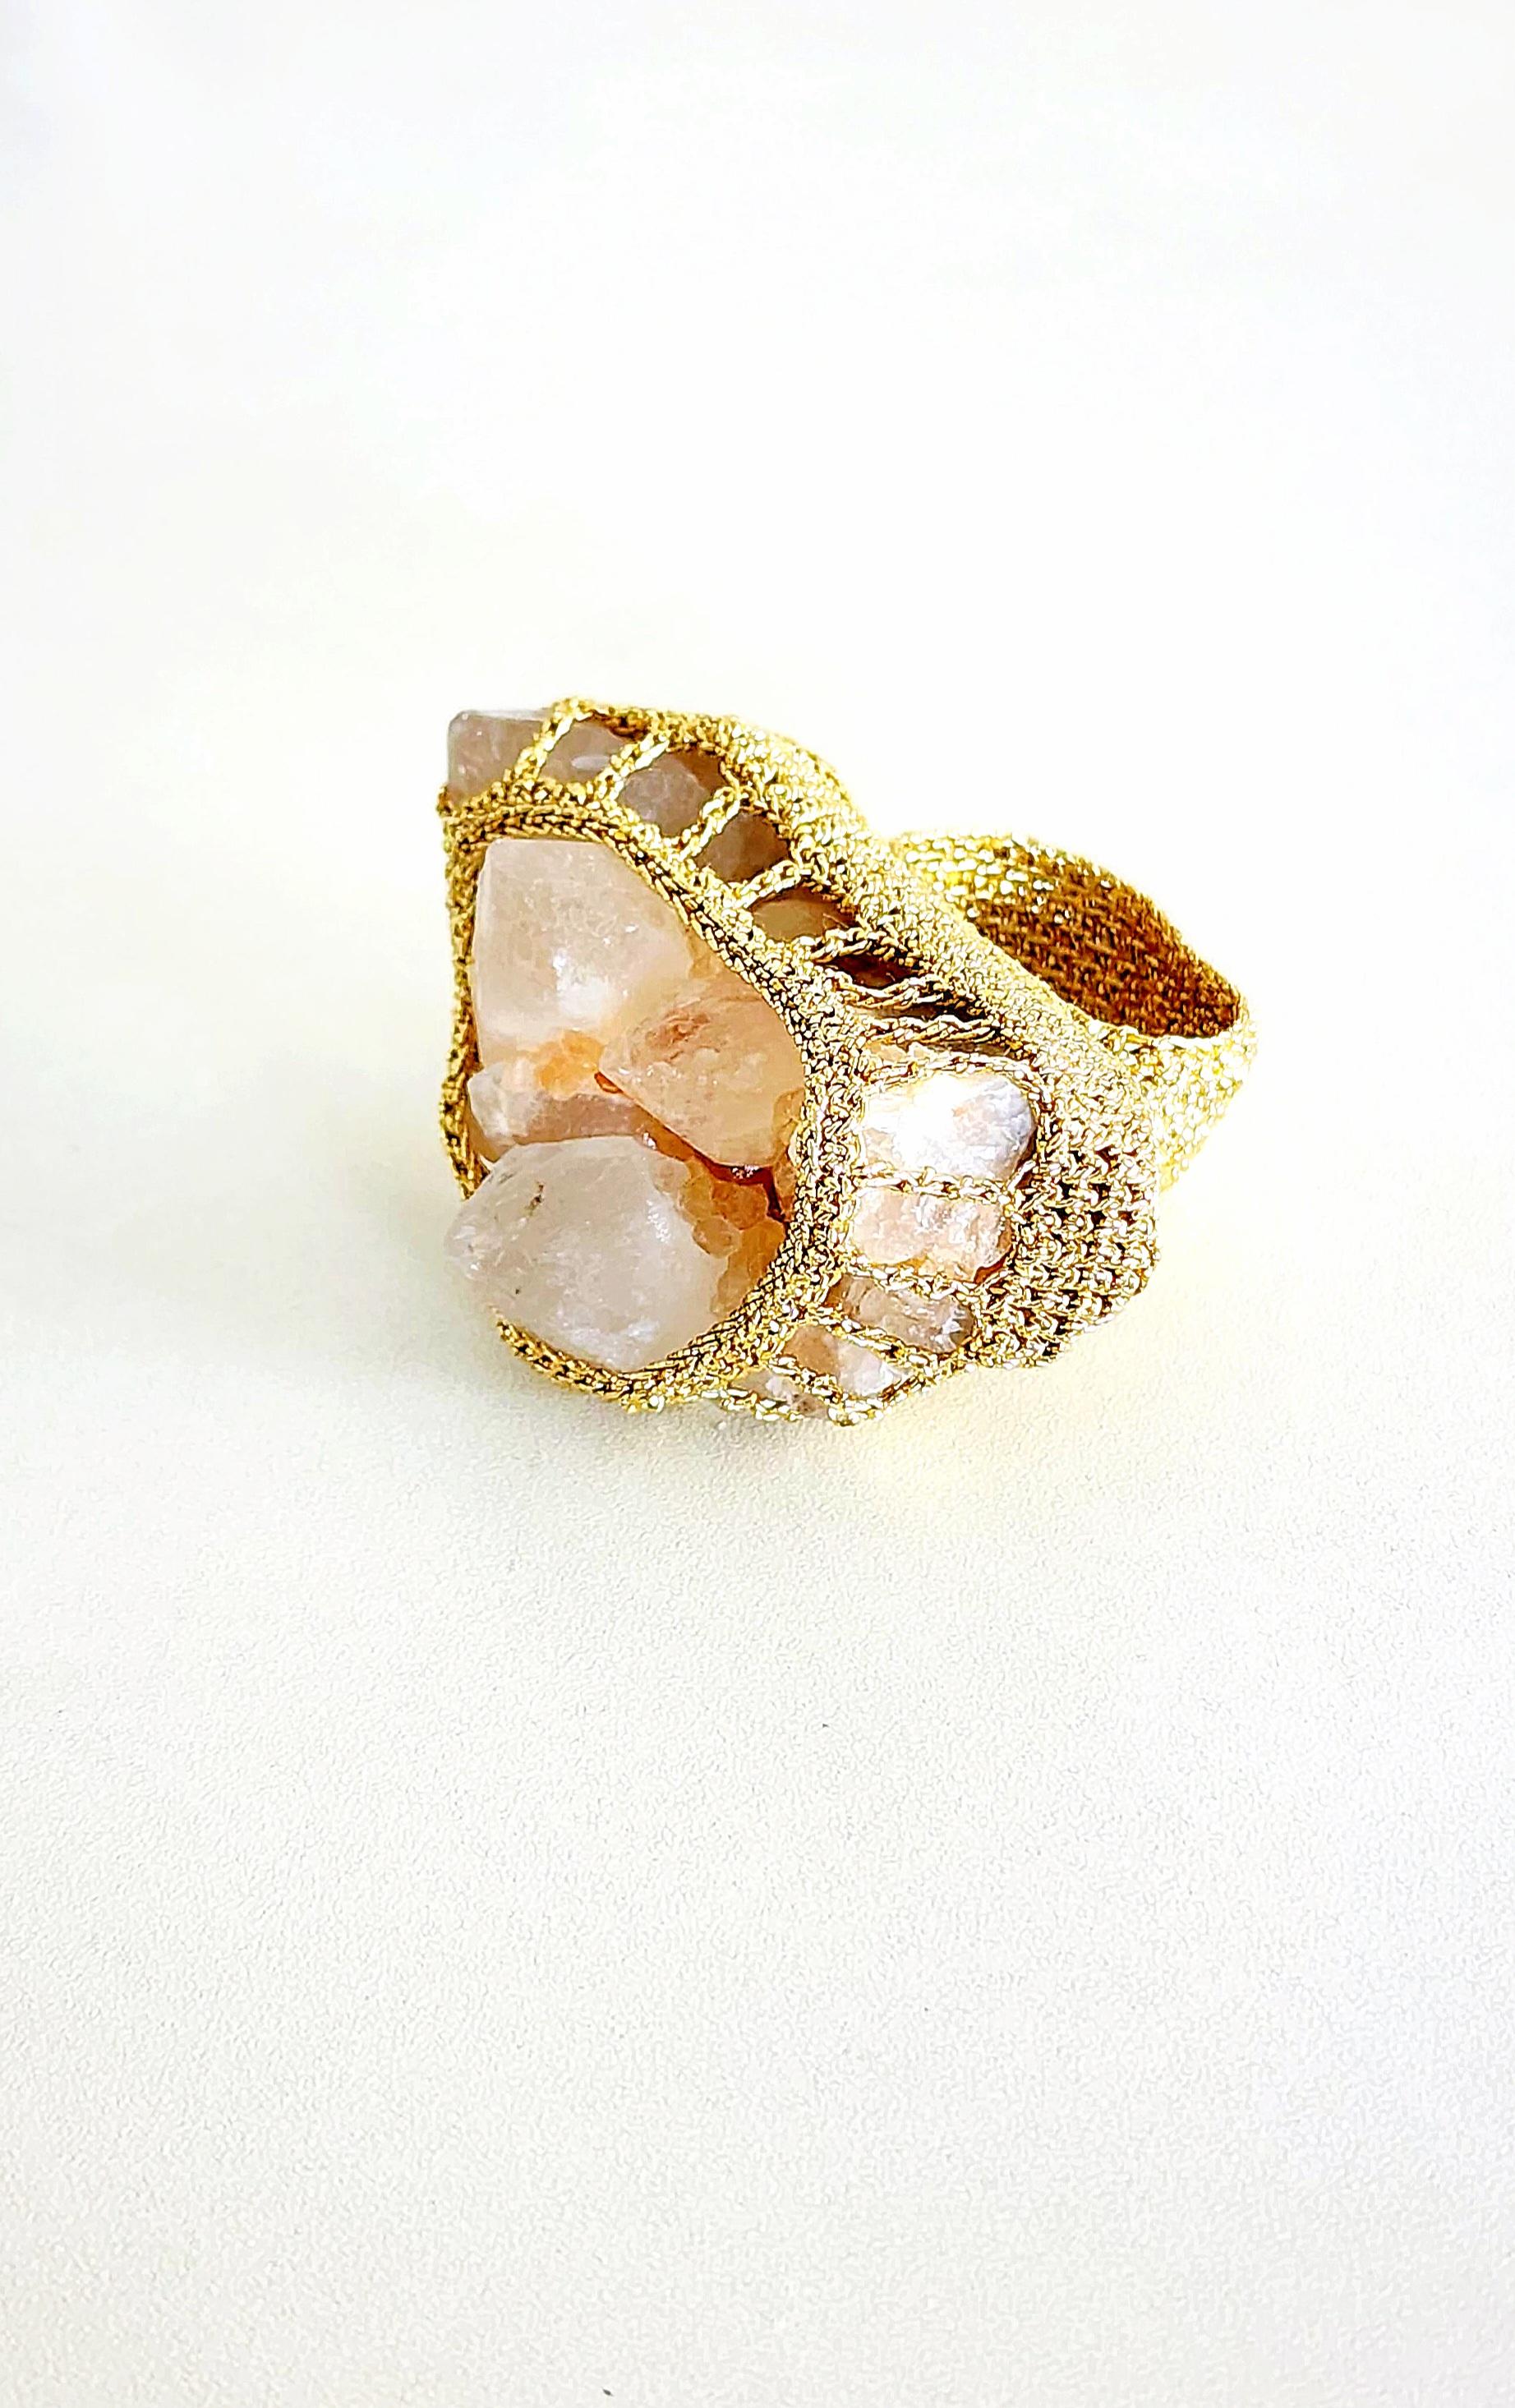 This is a one of a kind crochet ring. The stone is a rough cut Rose Quartz. The crochet cradles the stone beautifully. It is a statement ring. Definetely a conversation starter. I let the stone dictate how the ring will end up looking.